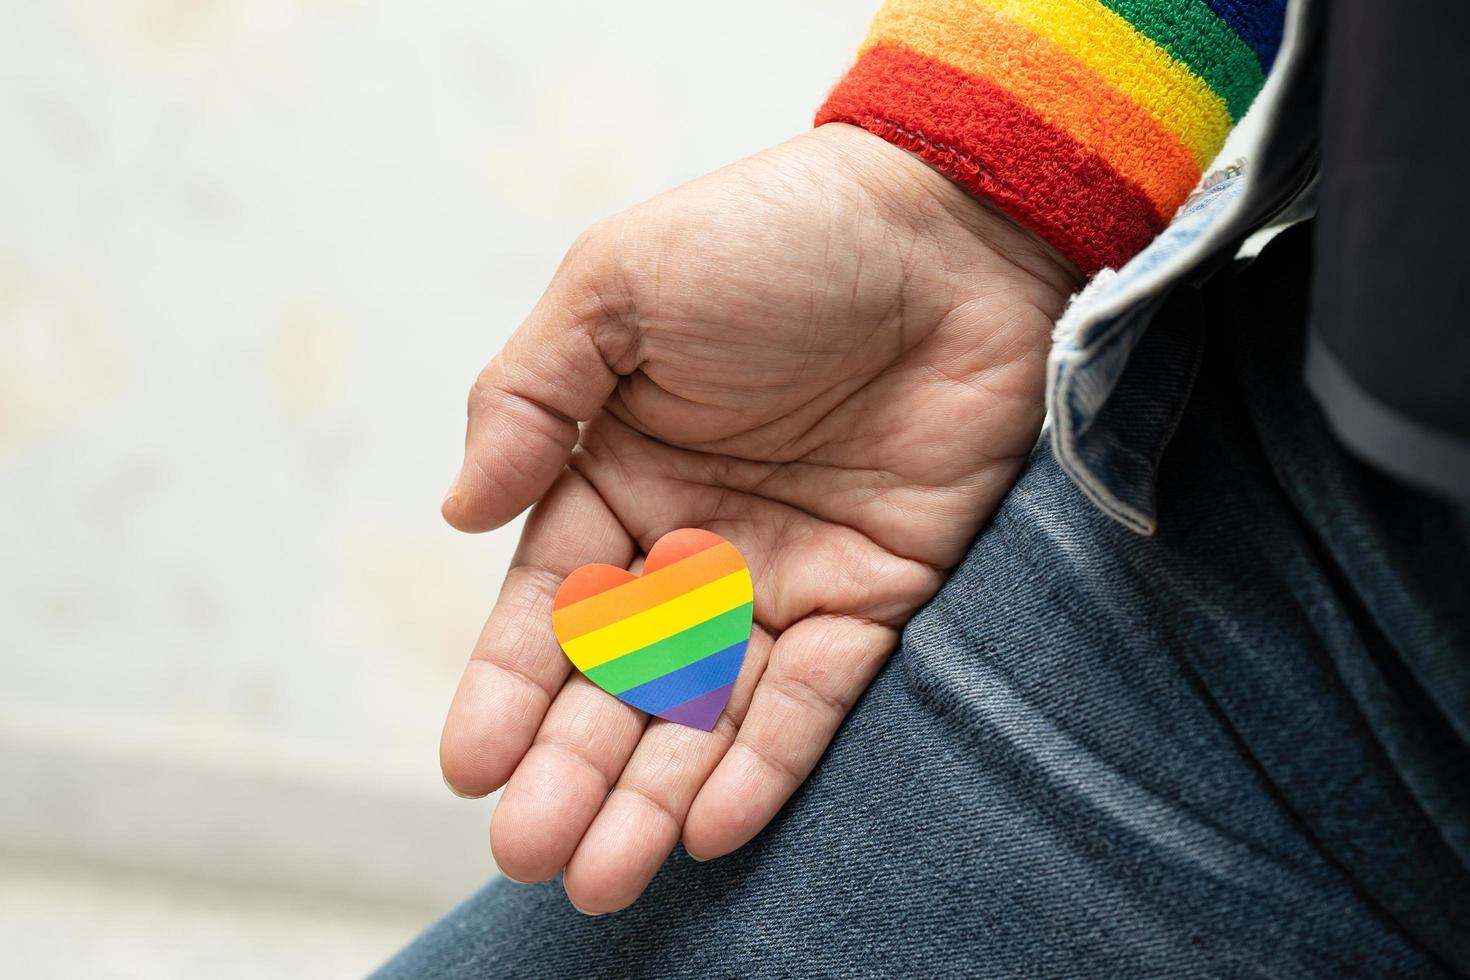 Asian lady wearing blue jean jacket or denim shirt and holding rainbow color flag heart, symbol of LGBT pride month celebrate annual in June social of gay, lesbian, bisexual, transgender, human rights. photo